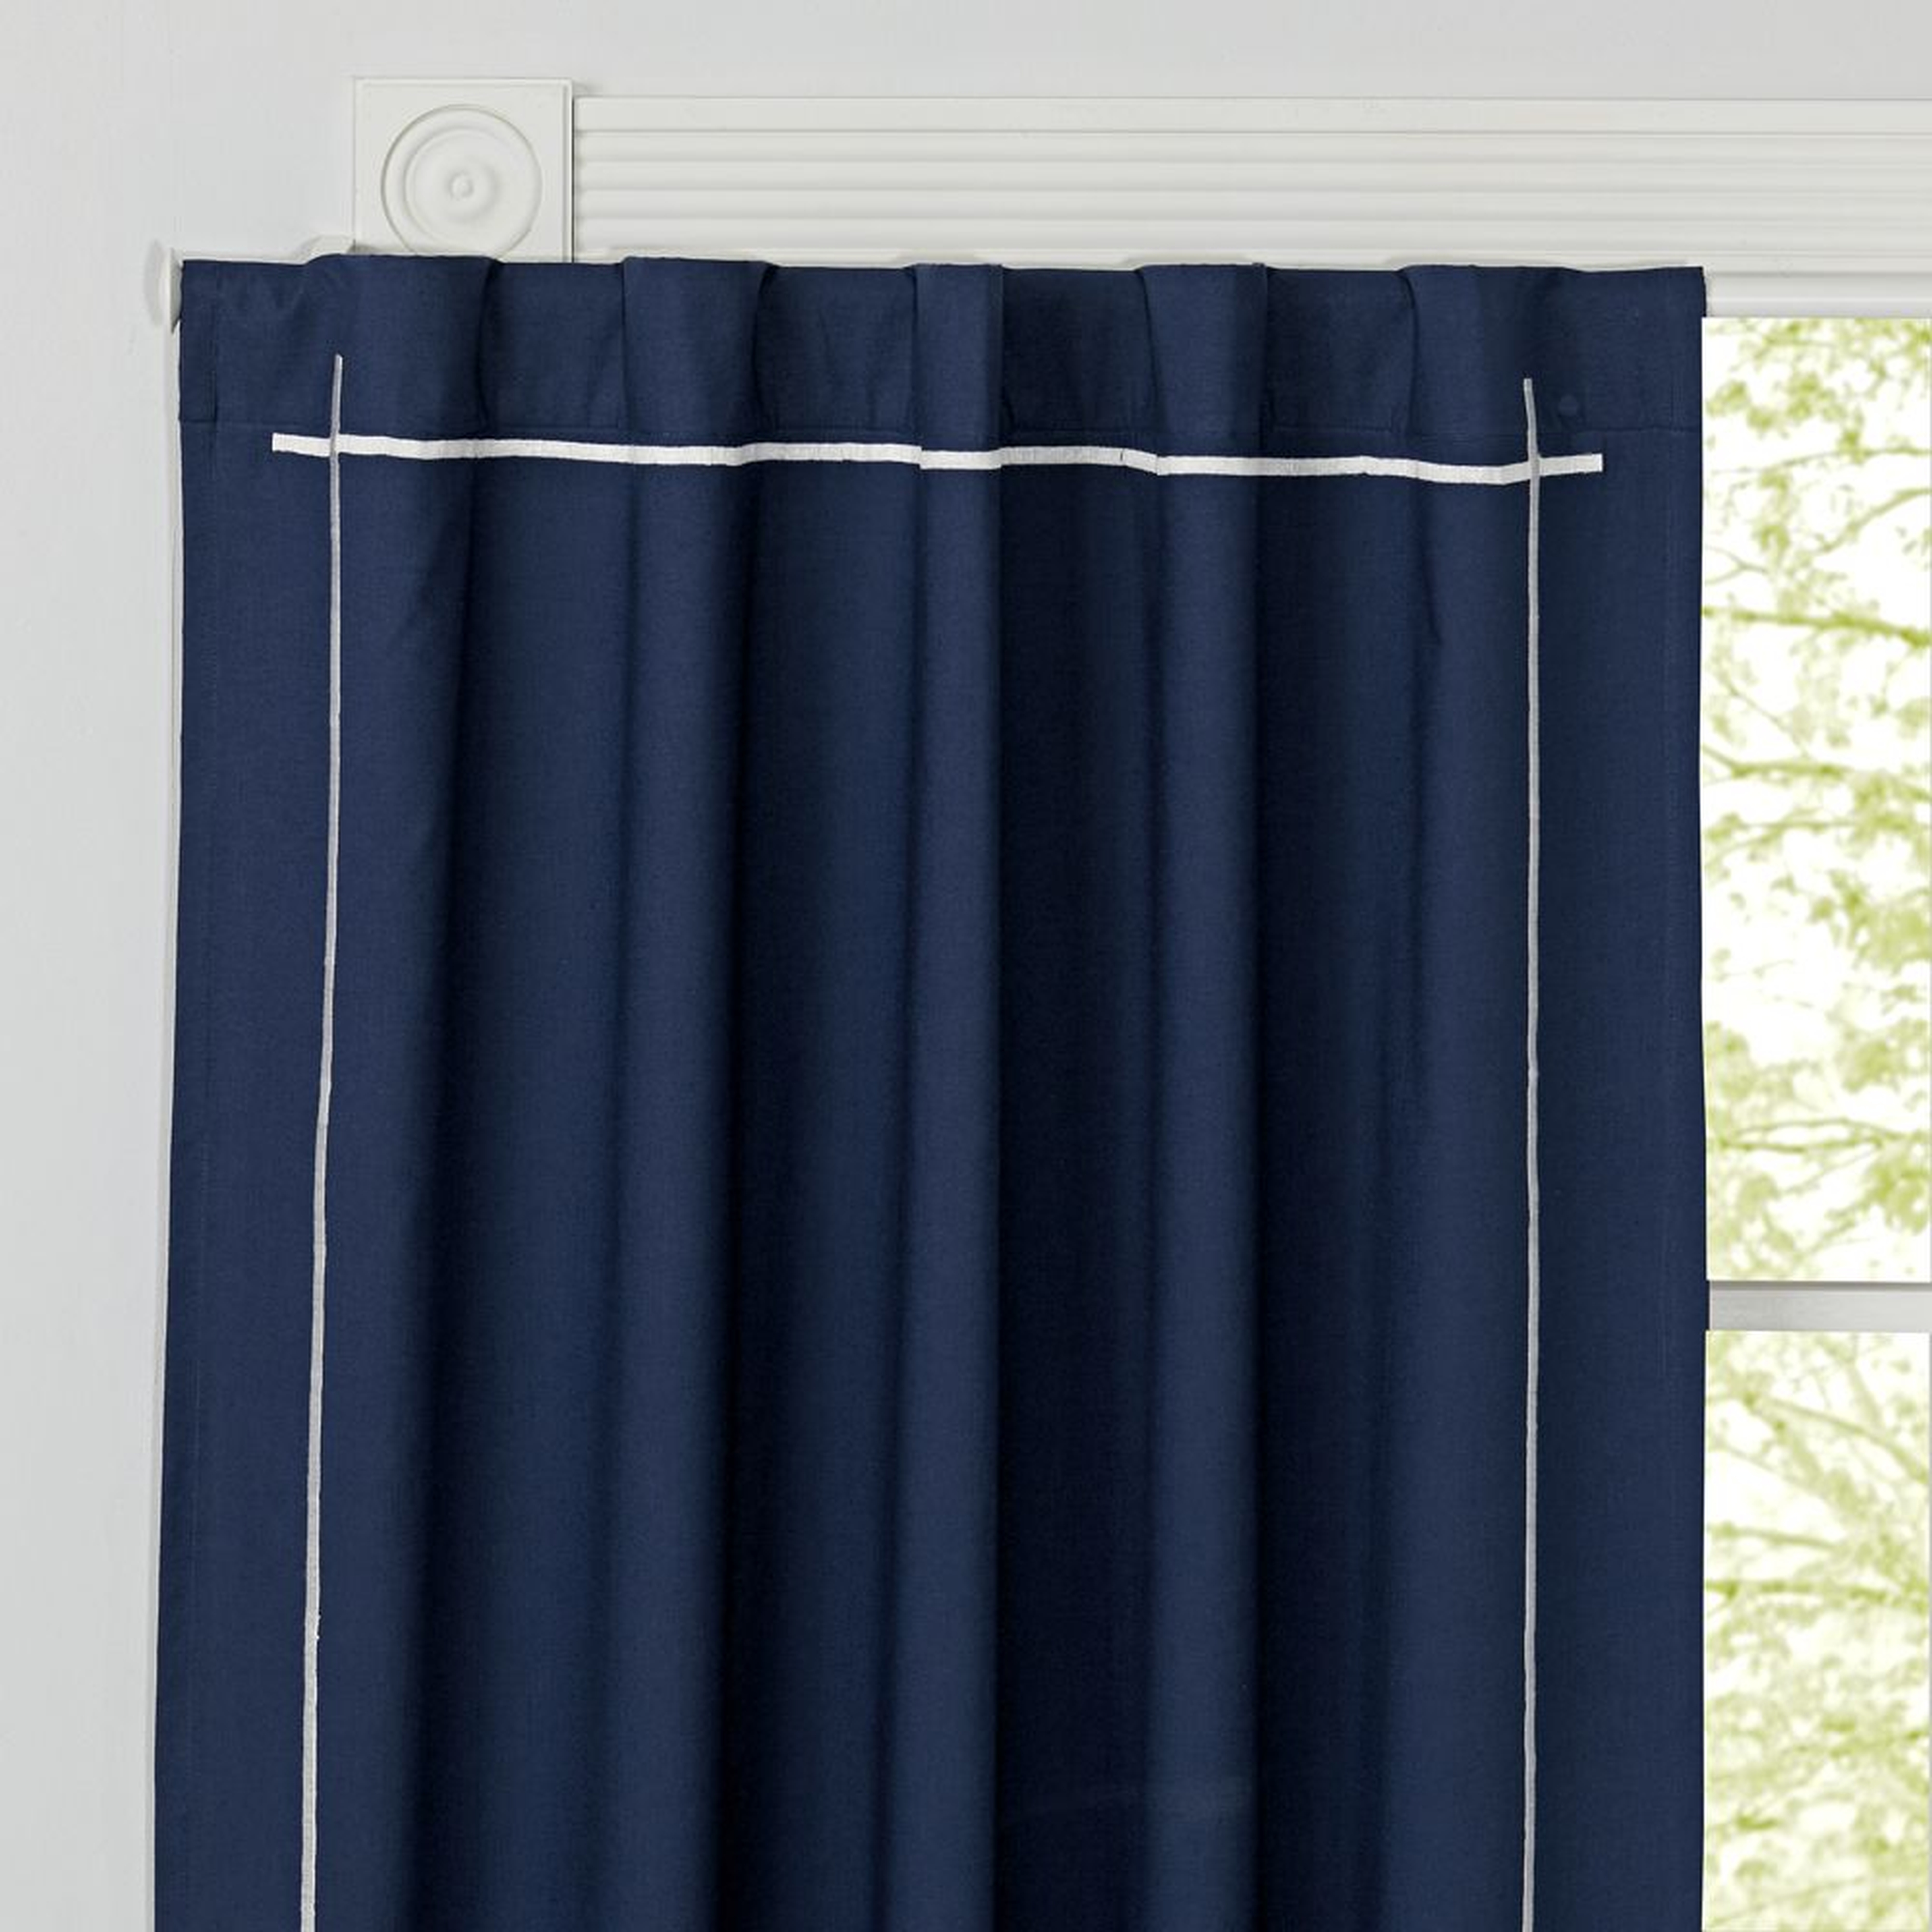 Genevieve Gorder 84" Navy Blackout Curtain - Crate and Barrel